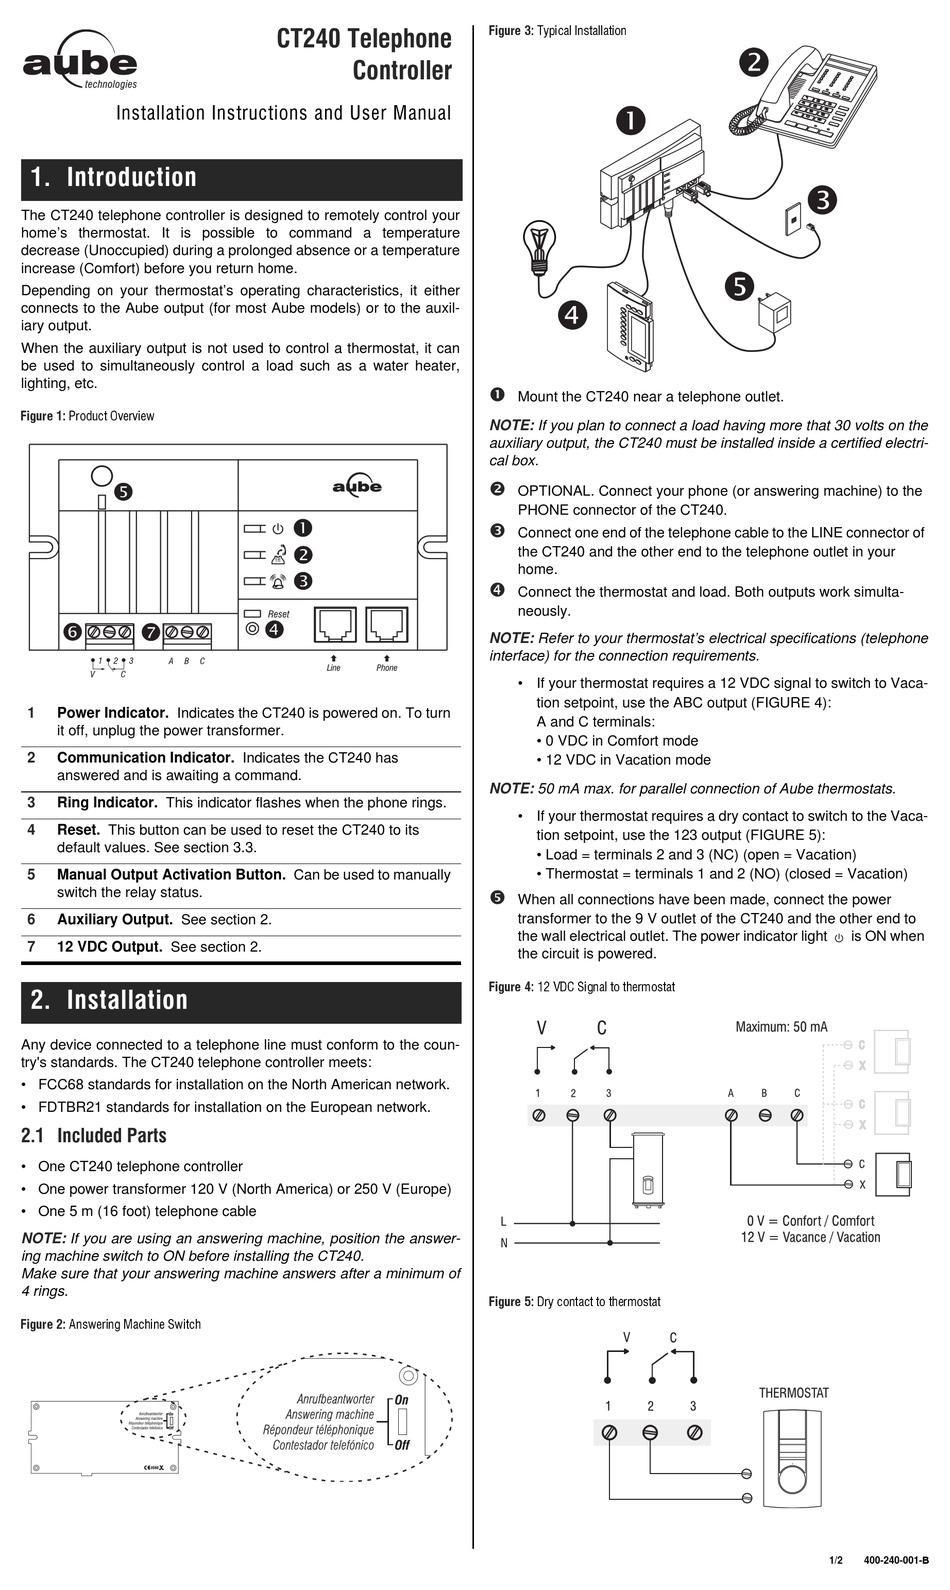 RESIDEO AUBE CT240 INSTALLATION INSTRUCTIONS AND USER MANUAL Pdf ...